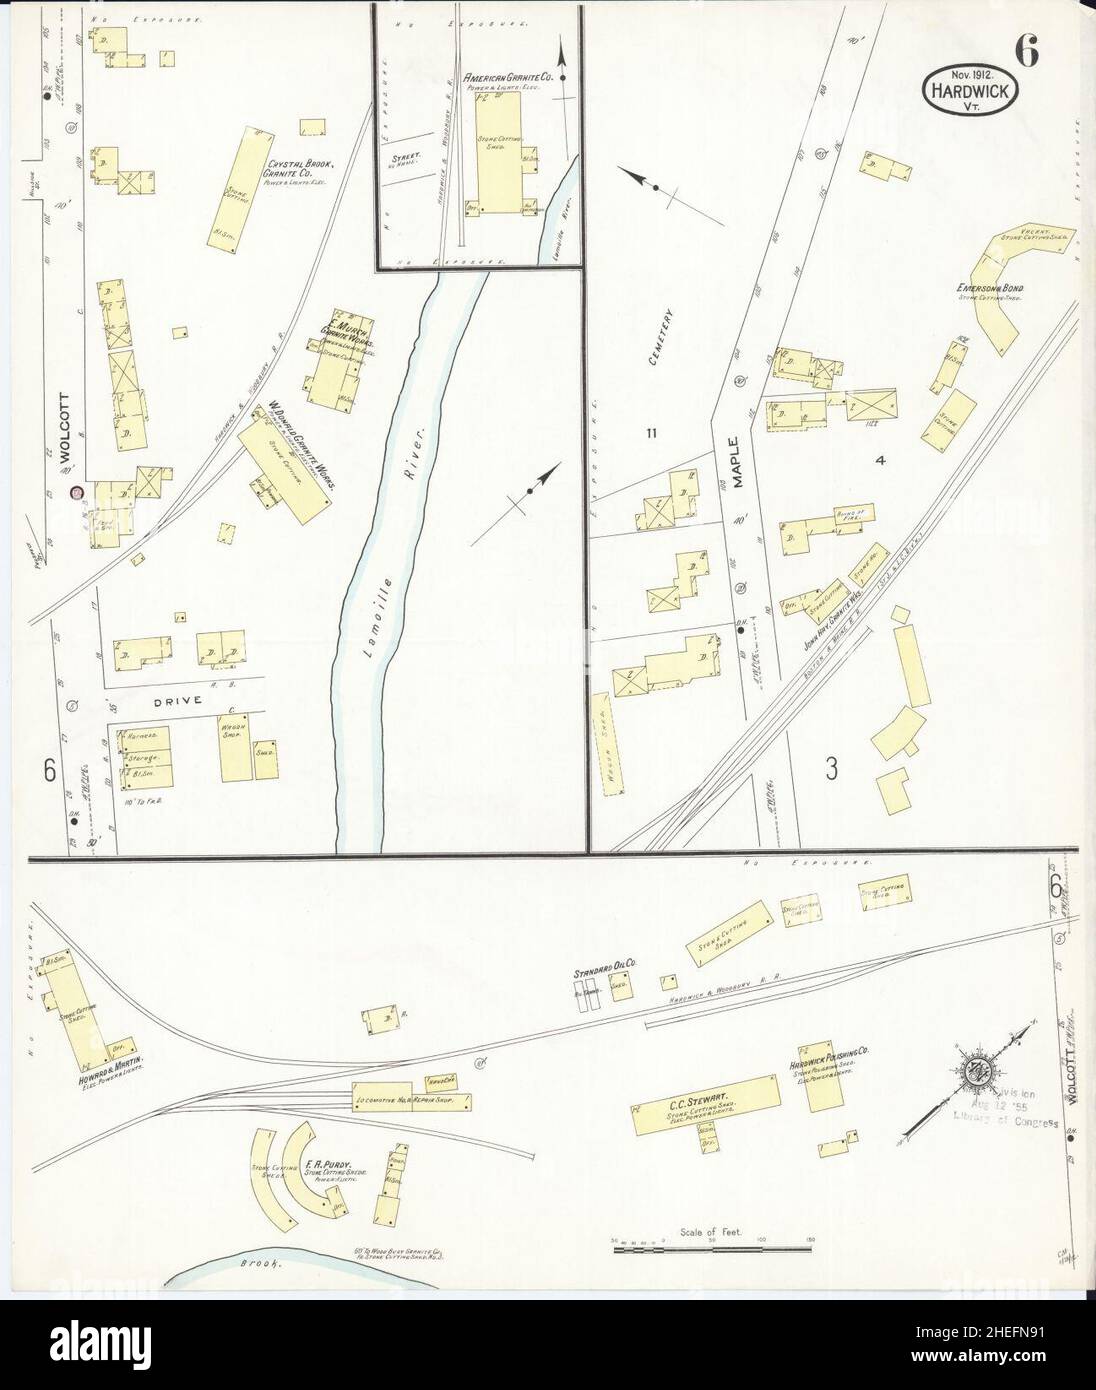 Sanborn Fire Insurance Map from Hardwick, Caledonia County, Vermont. Stock Photo